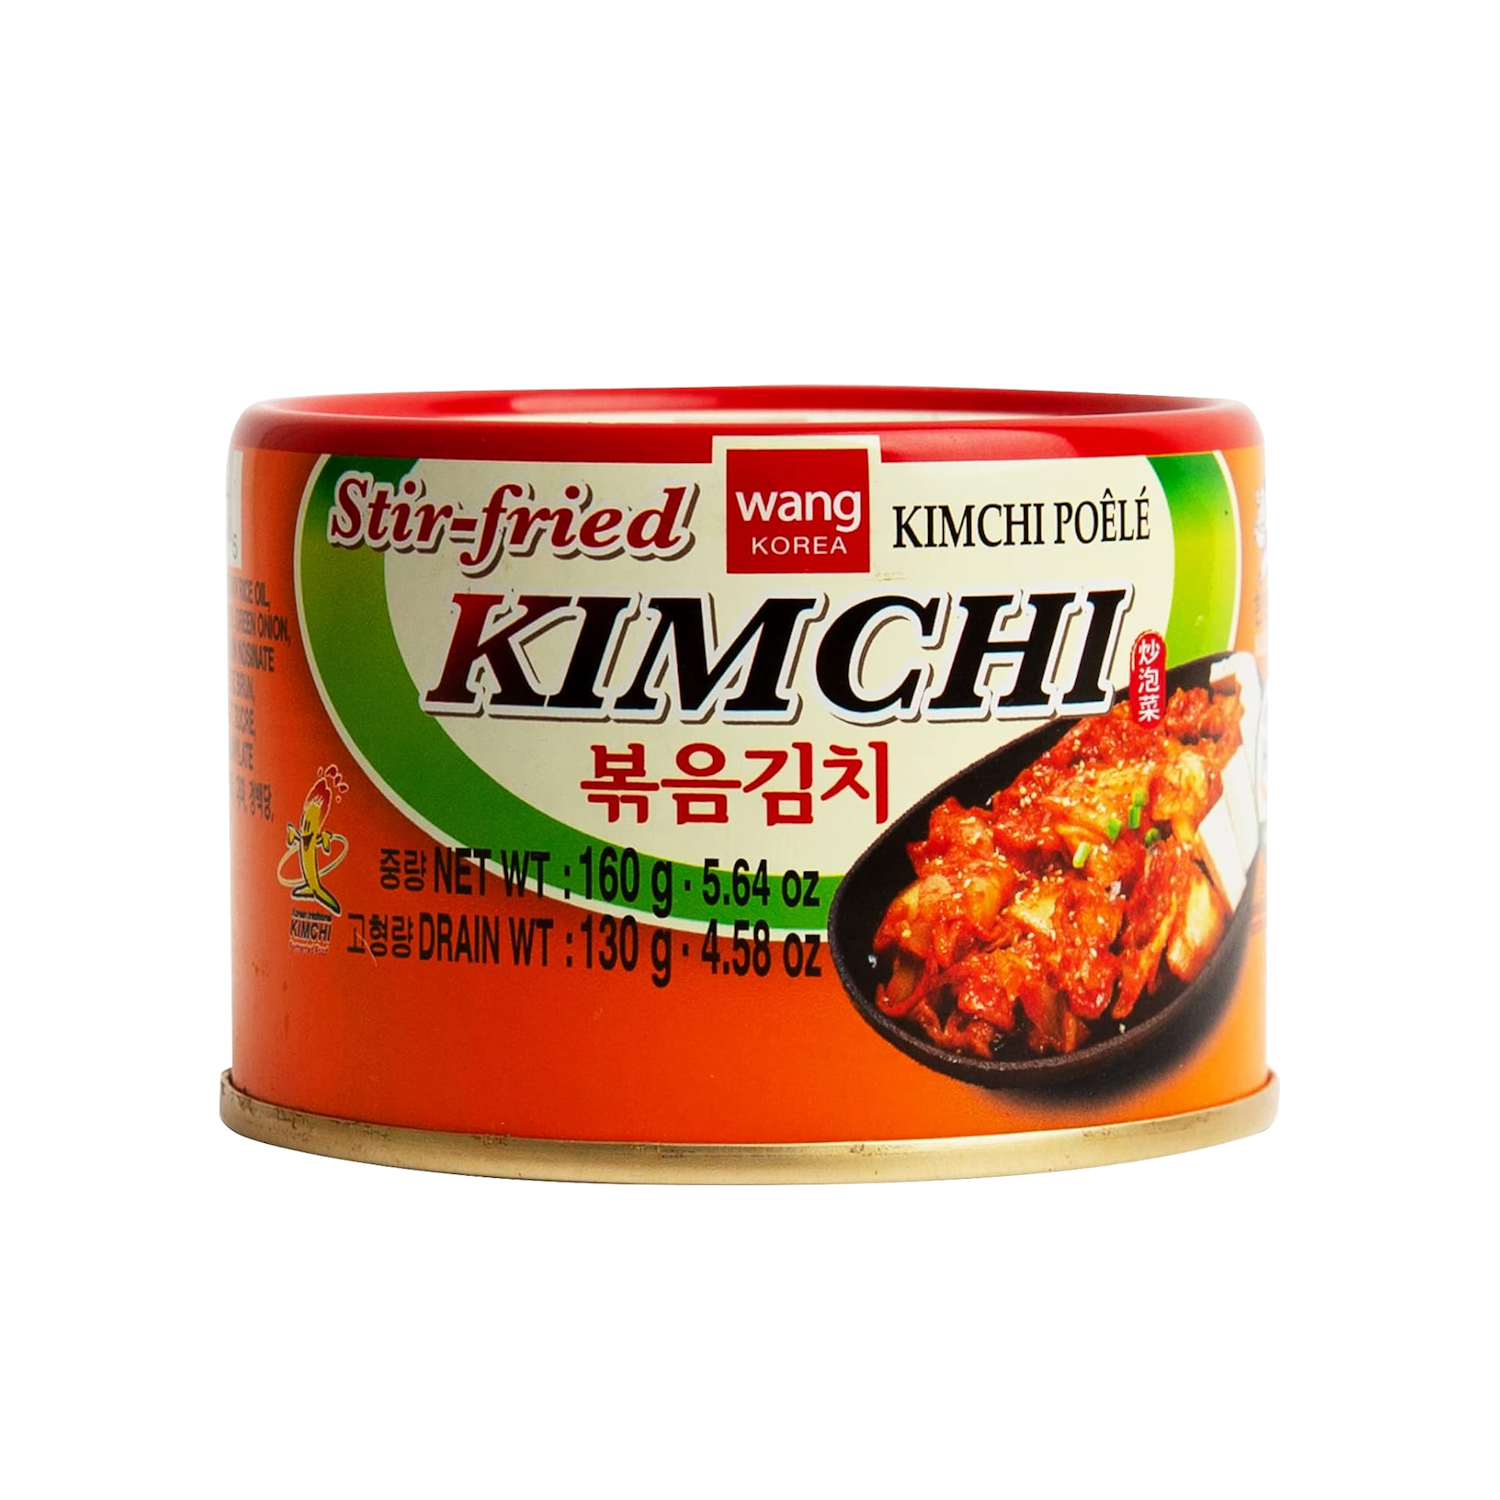 Wang Stir-fried Kimchi in can, 160g